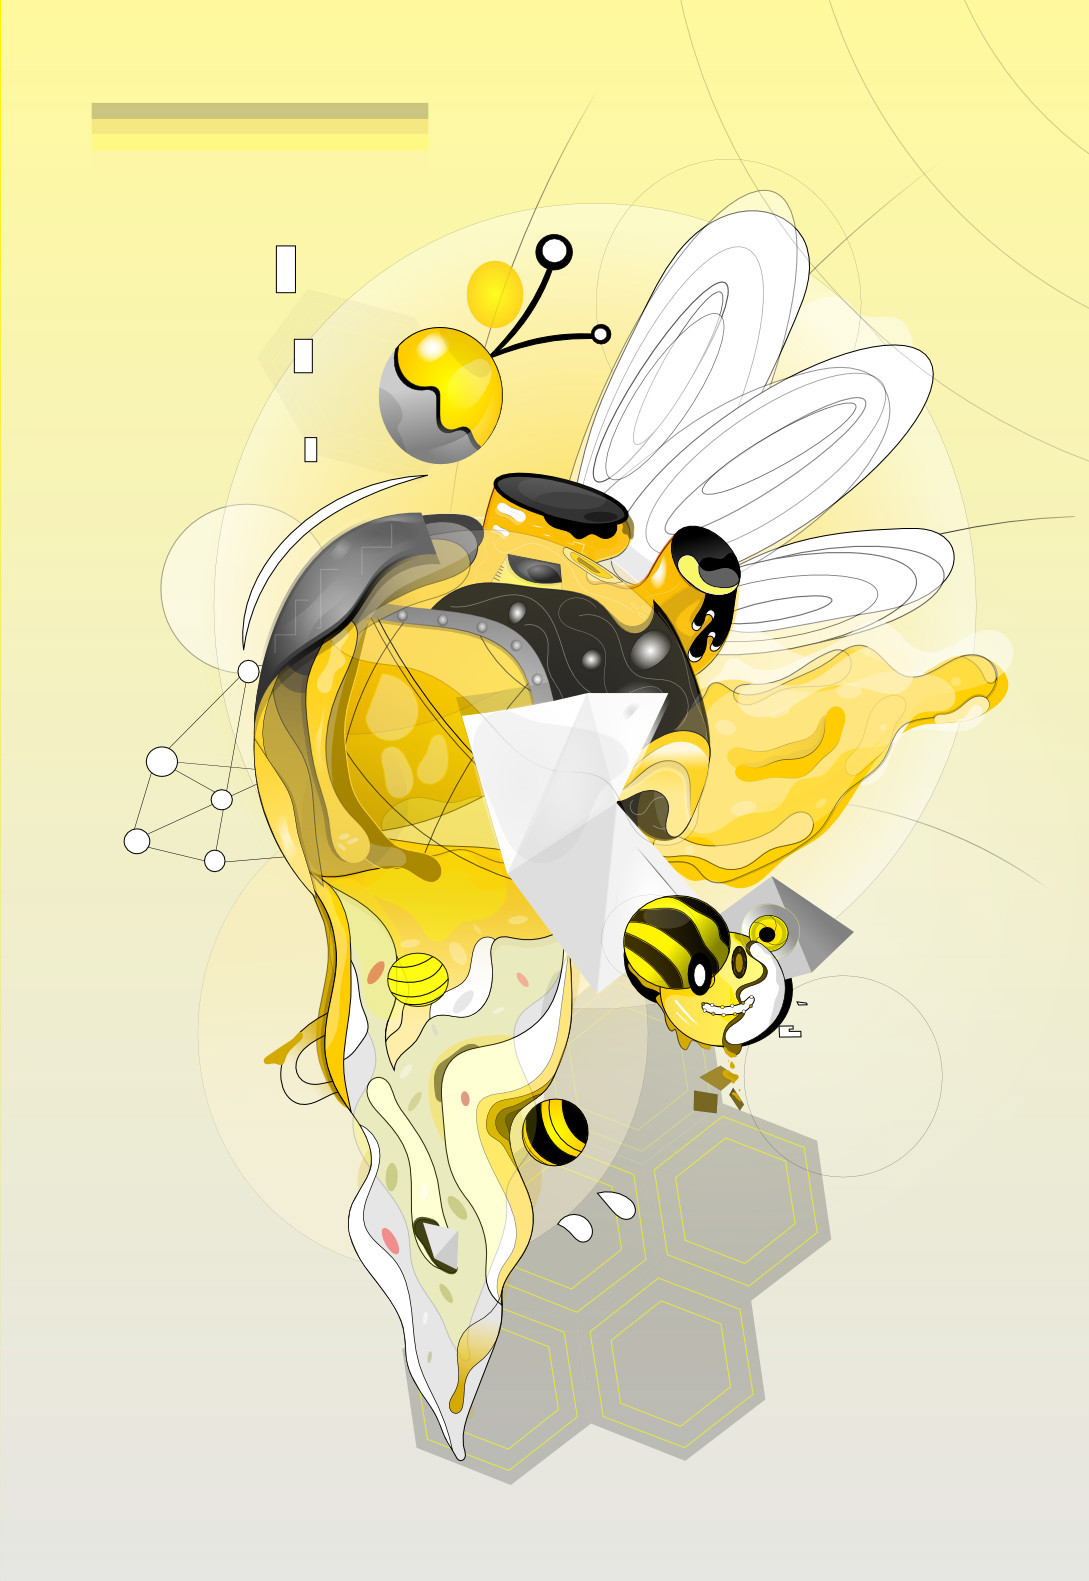 bumble-bee praying mantis ladybug insectos Insects vector inkscape ixnivek Kevin Philippe abstract